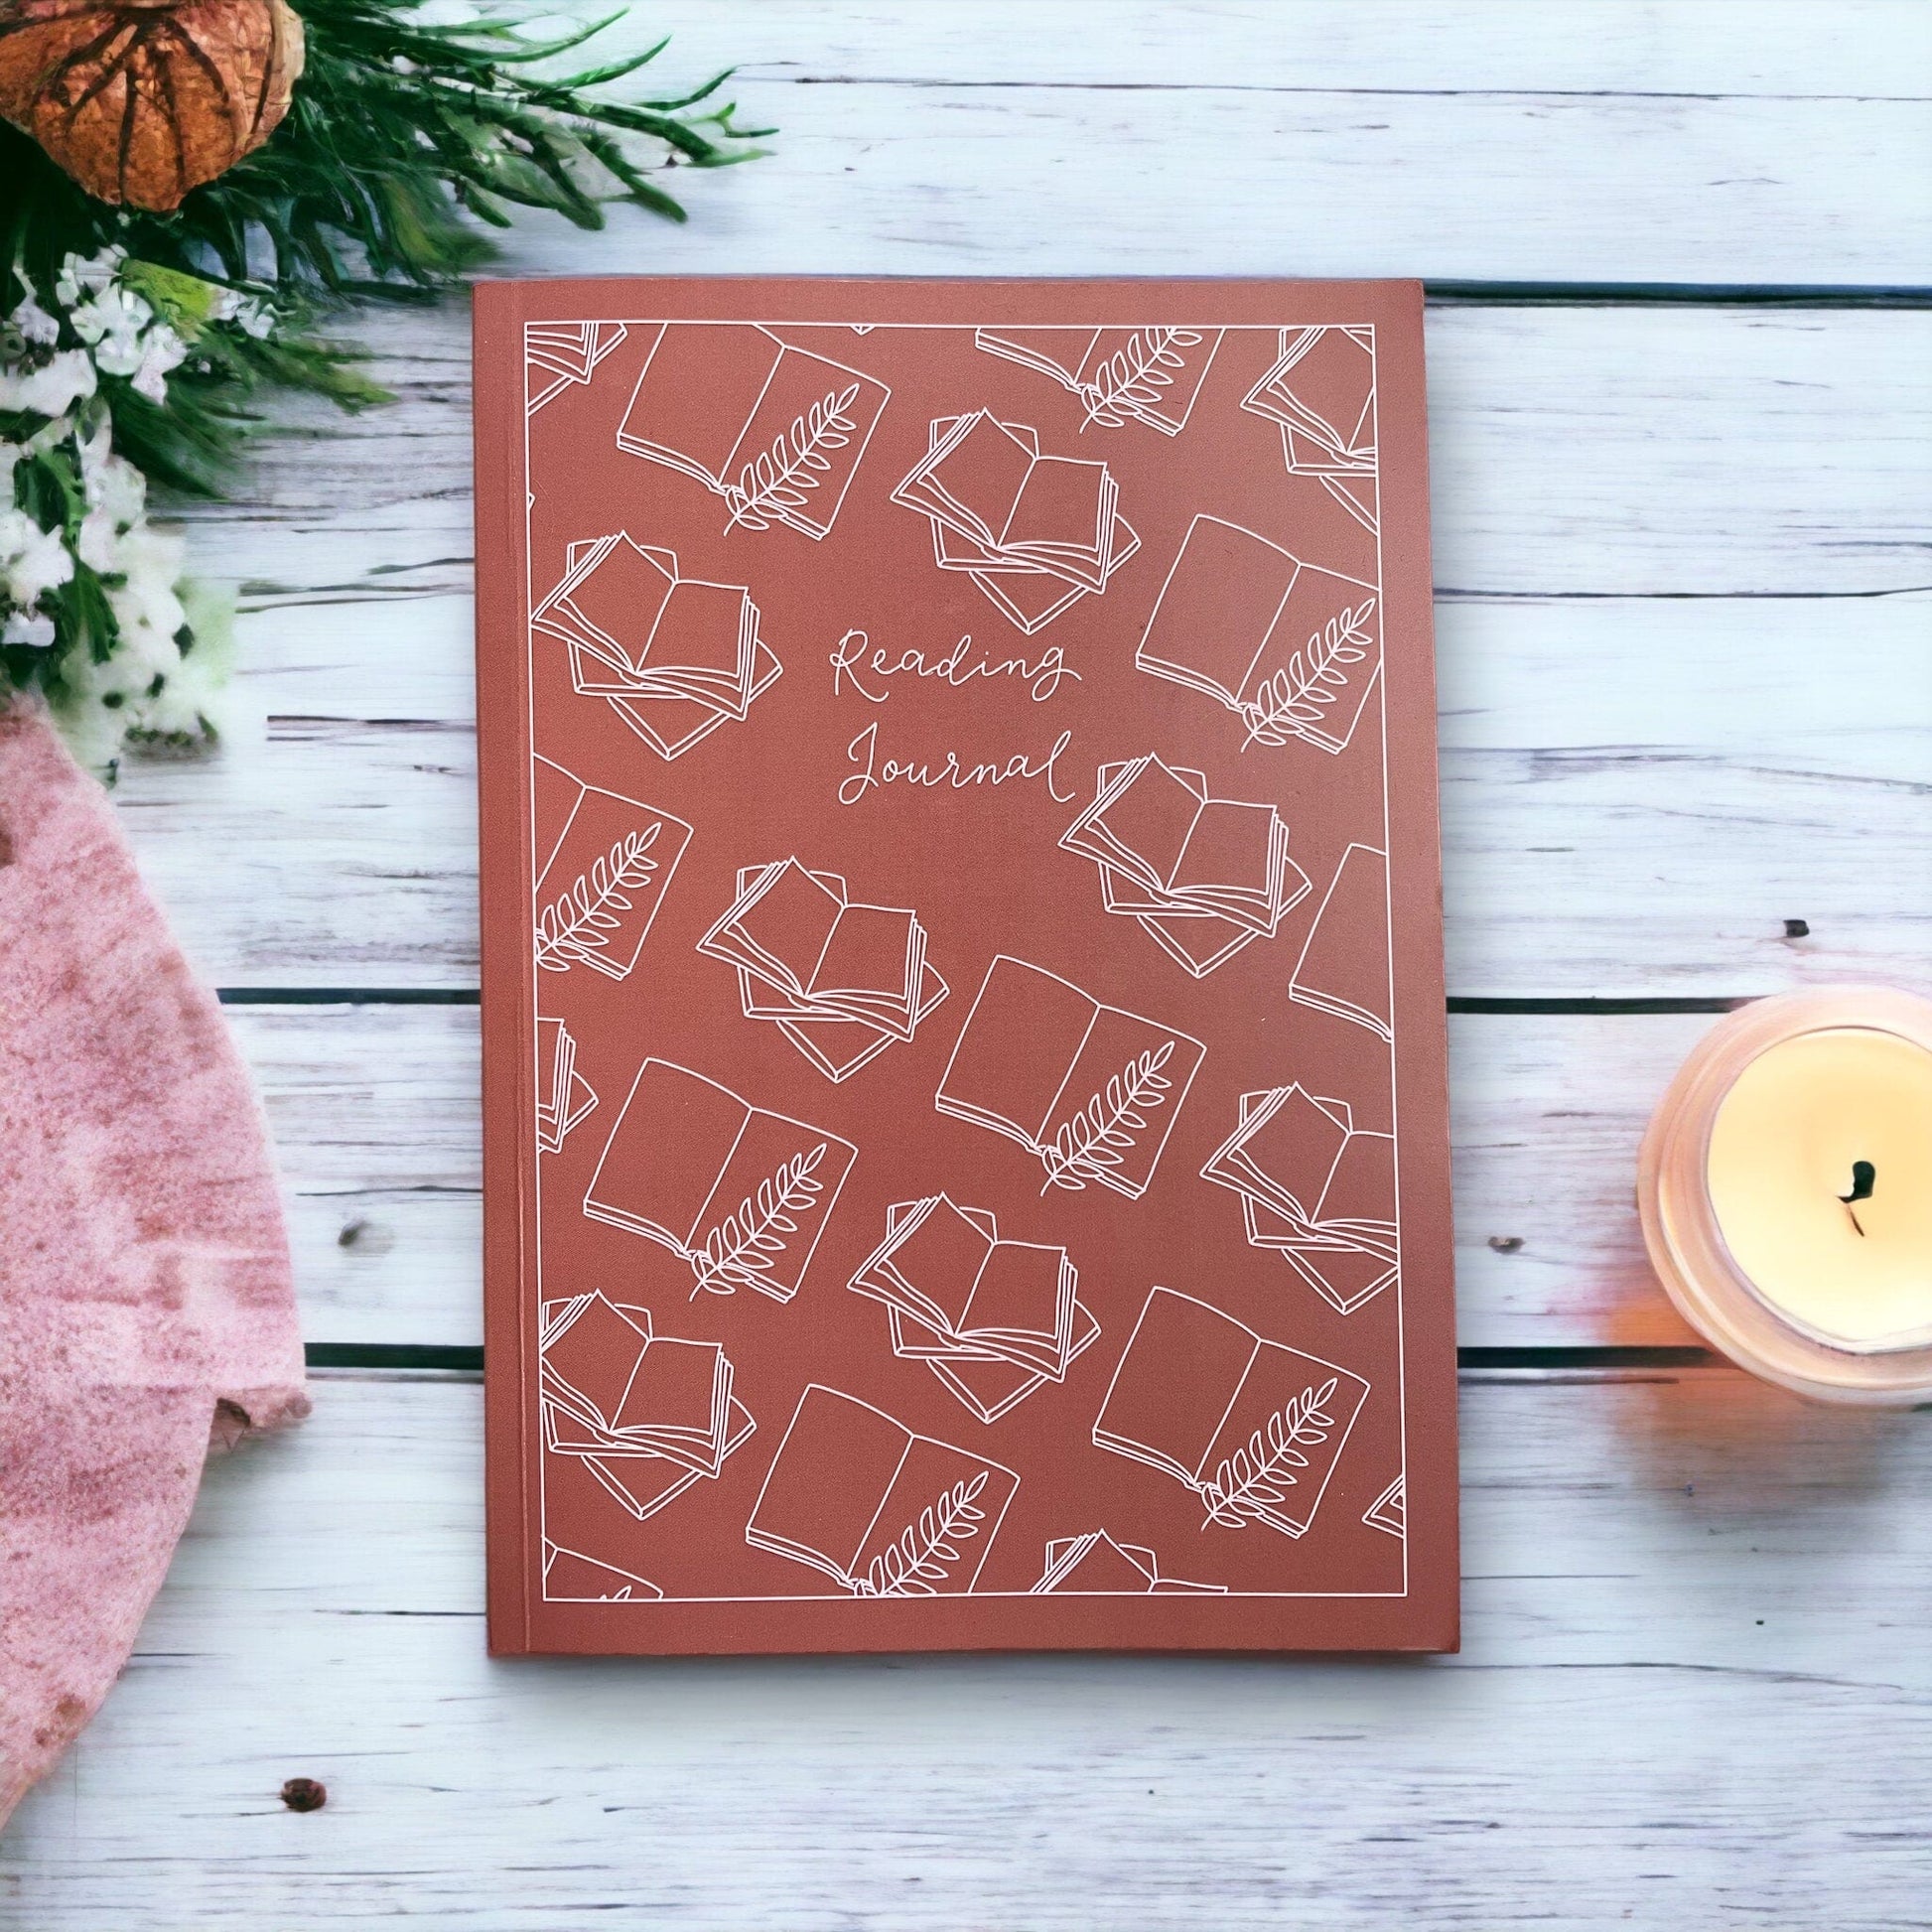 Reading journal Notebook And Hope Designs Blush Pink  